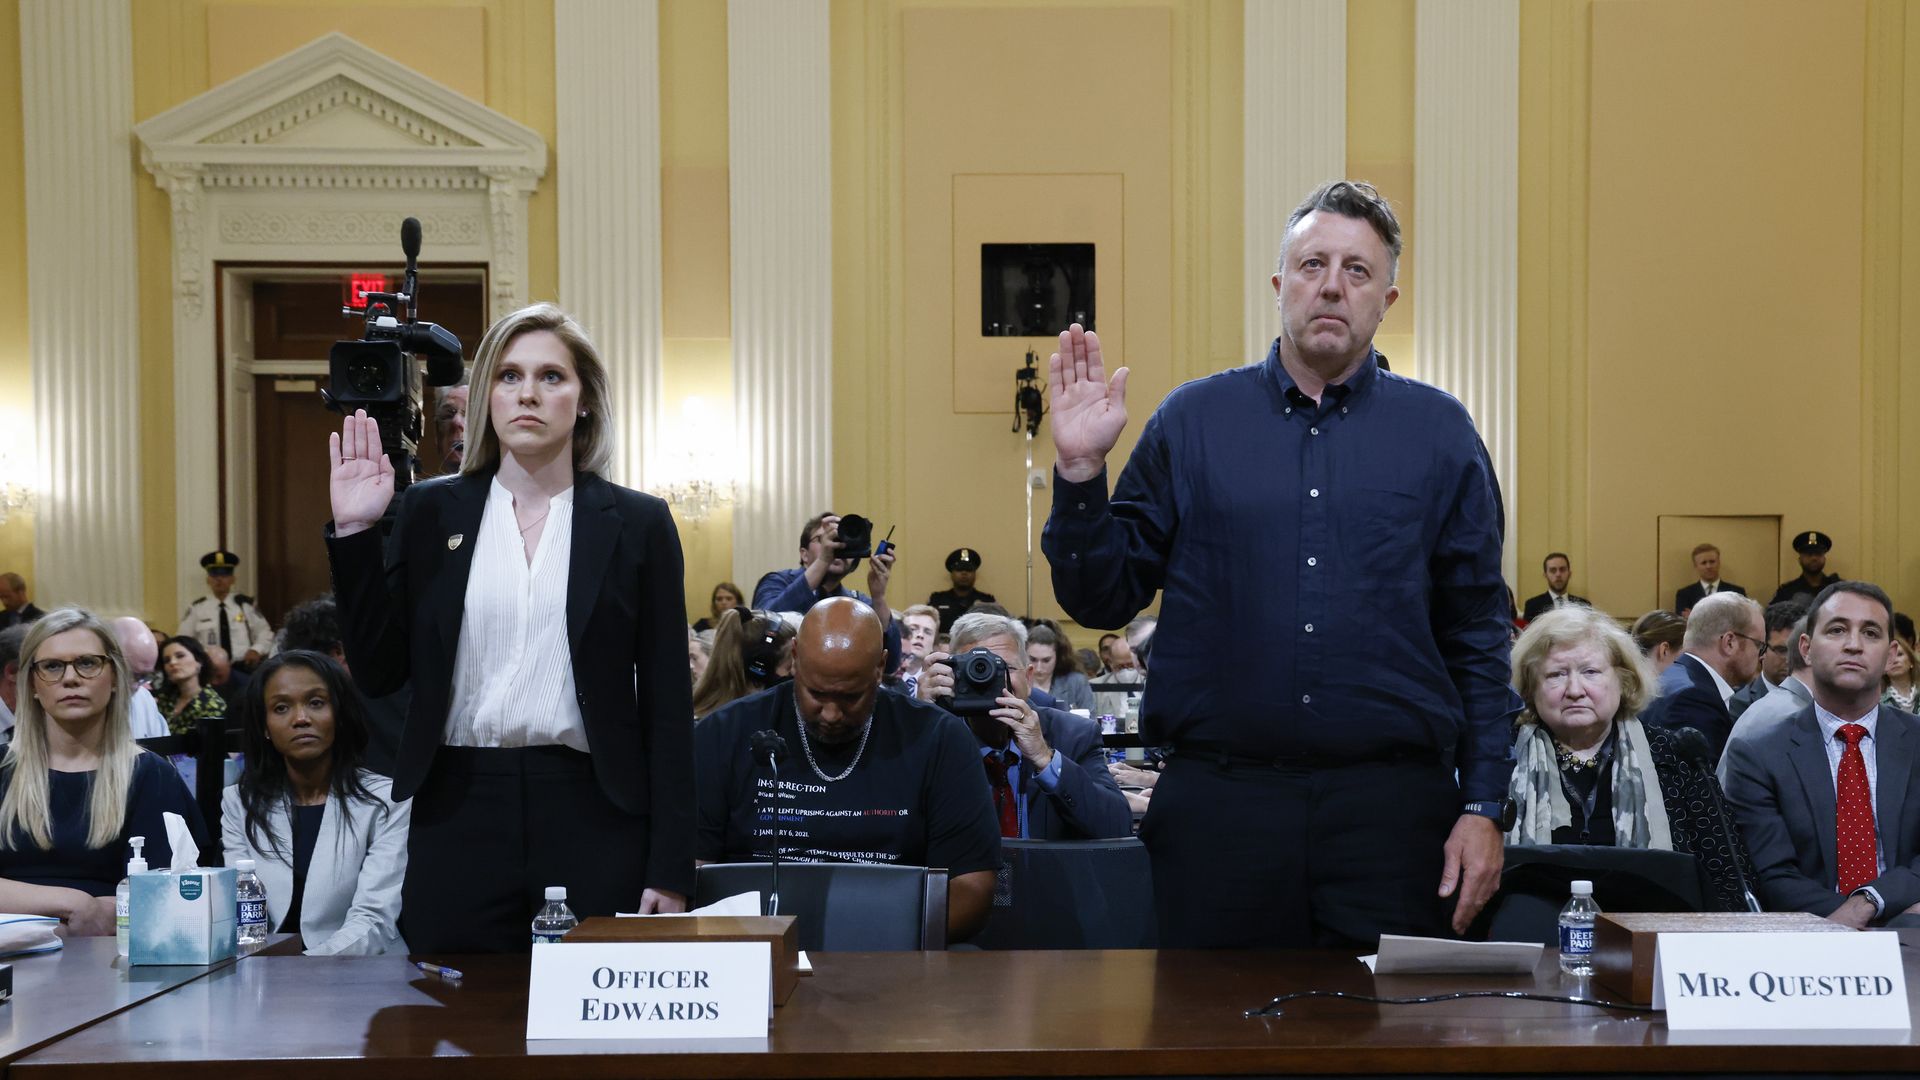 Caroline Edwards, a US Capitol Police officer injured in the Jan. 6 riot, left, and filmmaker Nick Quested, swear in to a hearing of the Select Committee to Investigate the January 6th Attac